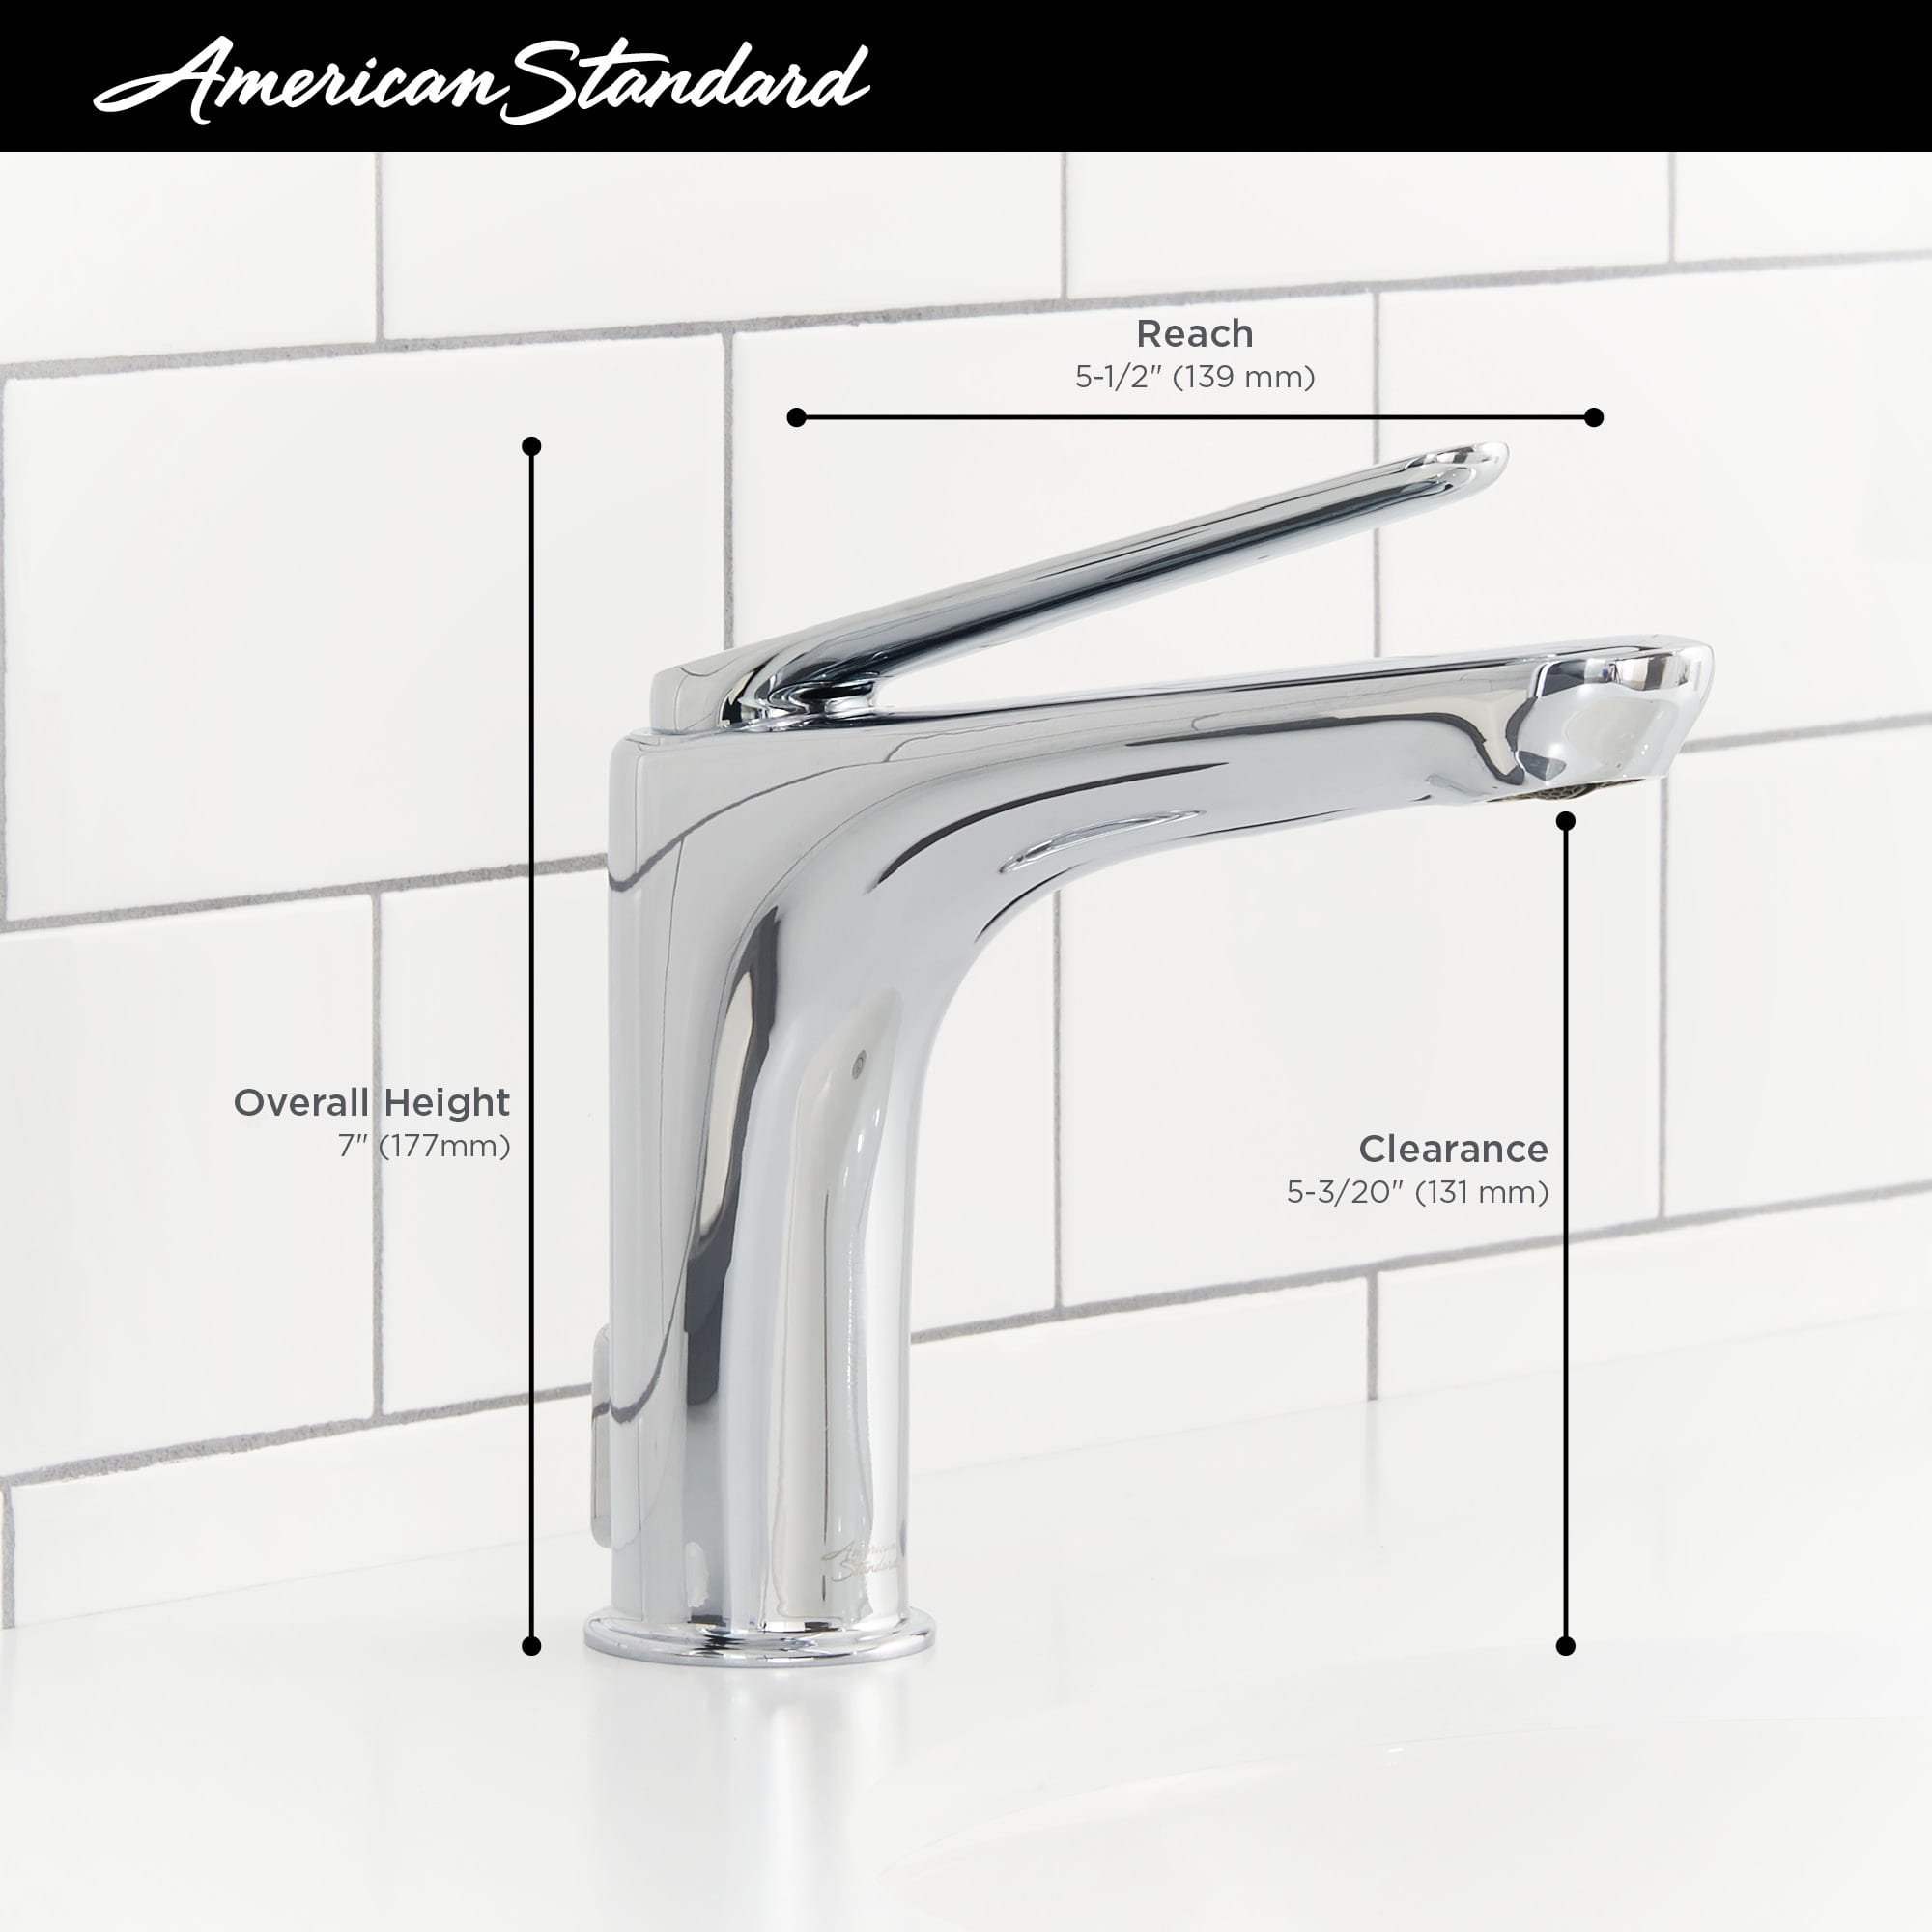 Studio S Single Hole Single Handle Bathroom Faucet 12 gpm  45 L min With Lever Handle BRUSHED NICKEL